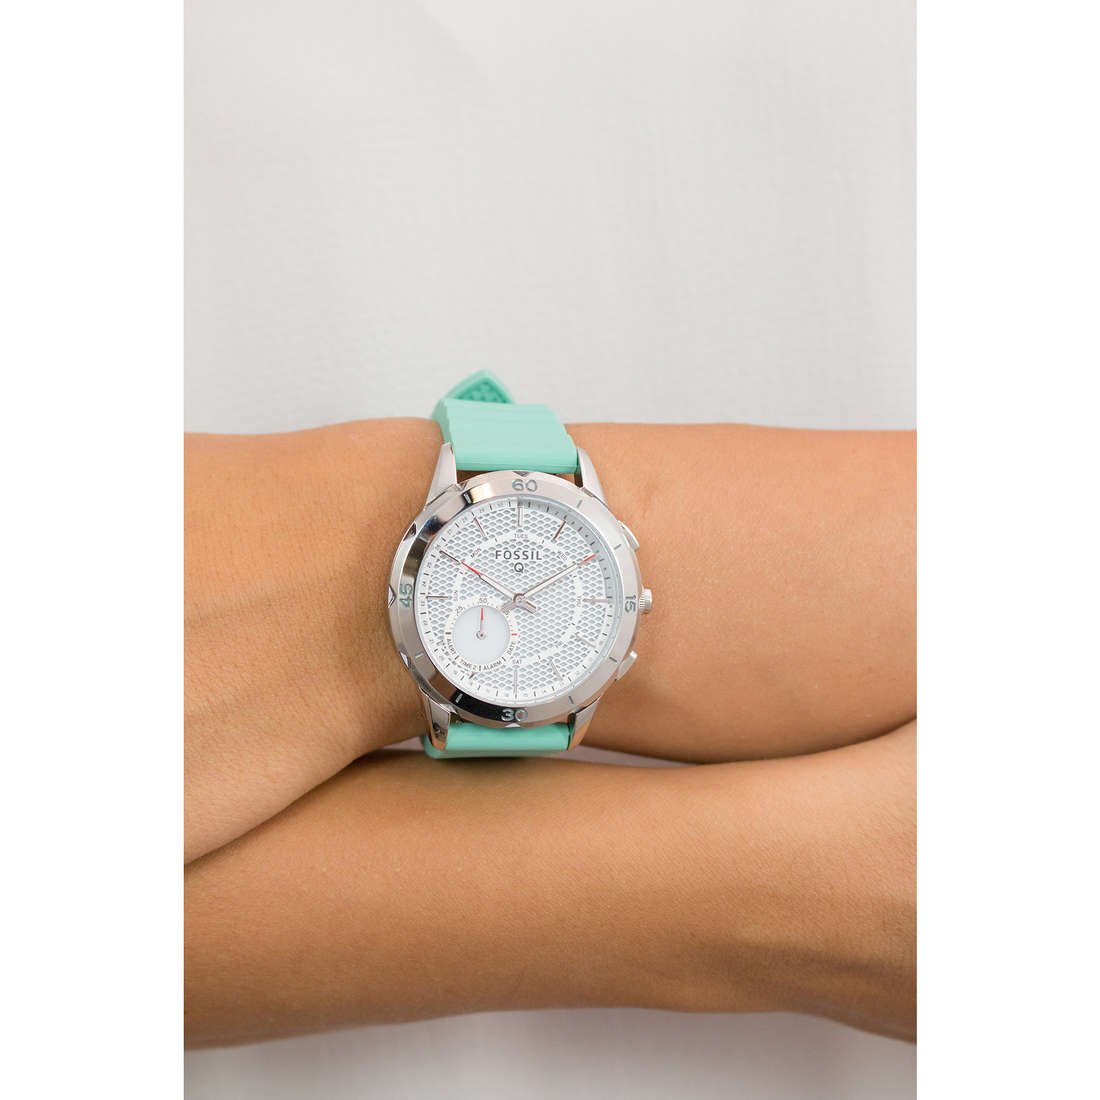 Fossil Smartwatches Q Modern Pursuit woman FTW1134 wearing